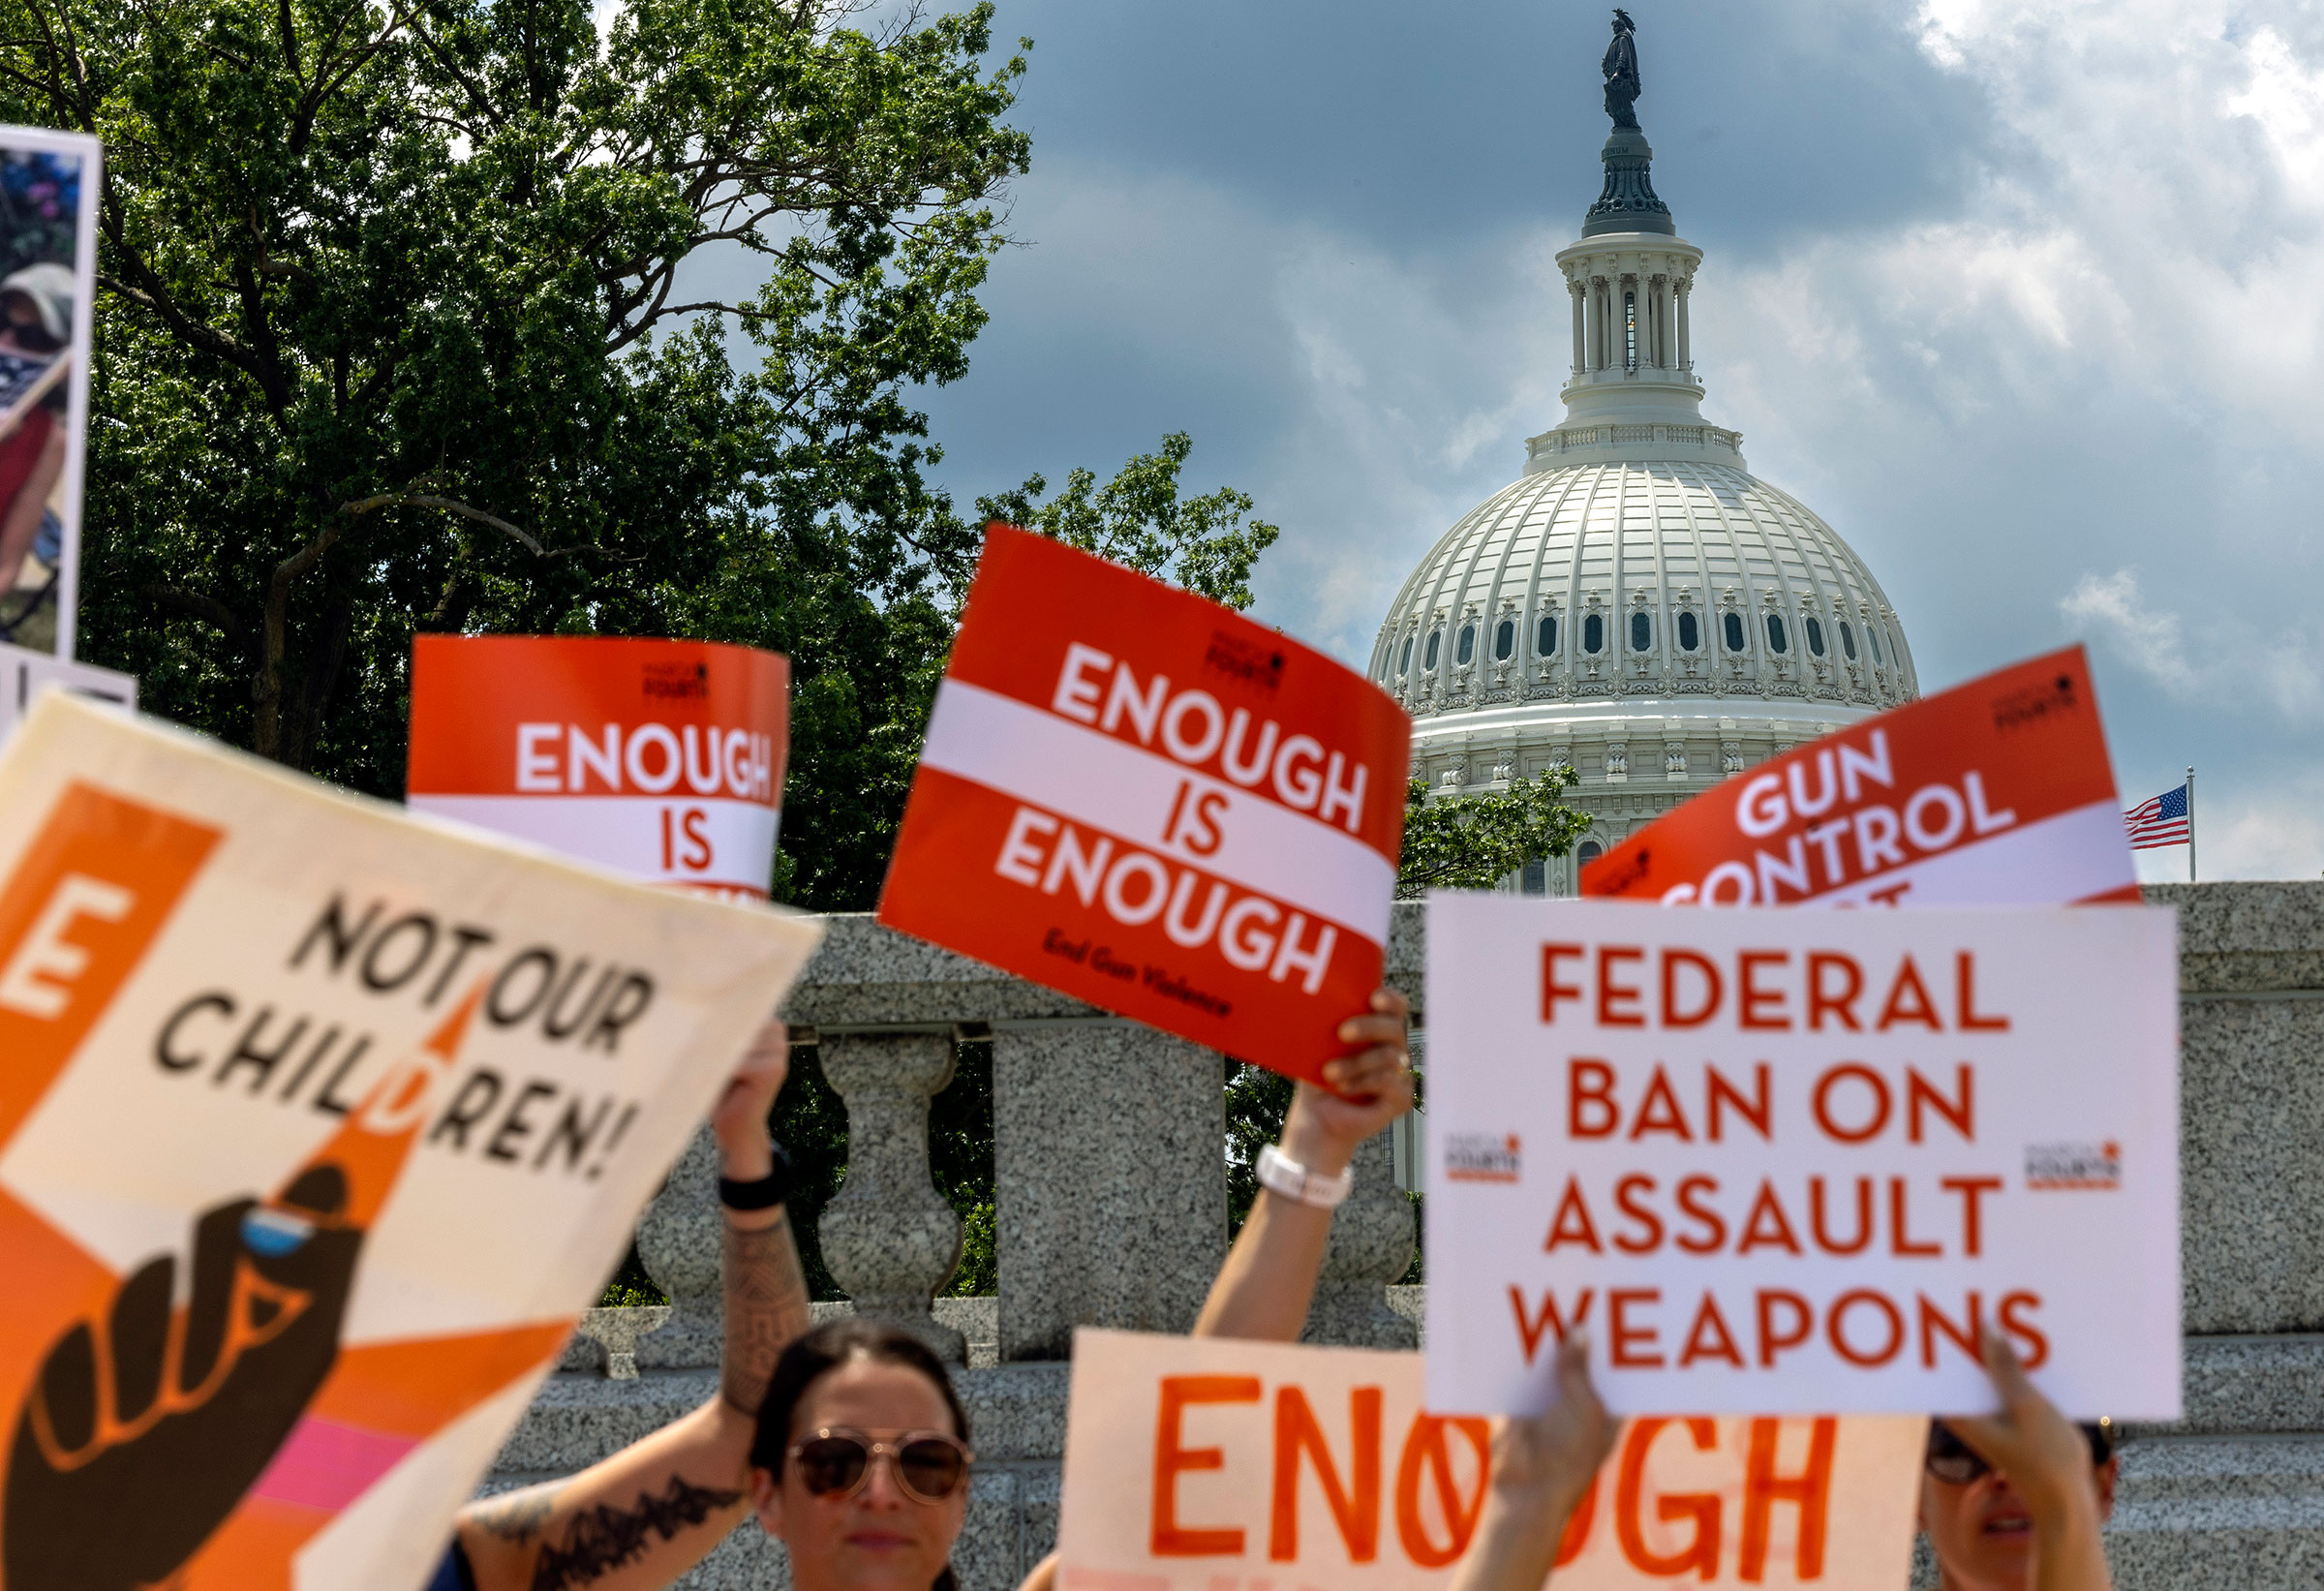 Gun control activists rally near the U.S. Capitol calling for a federal ban on assault weapons on July 13, 2022 in Washington, DC. (Kevin Dietsch—Getty Images)